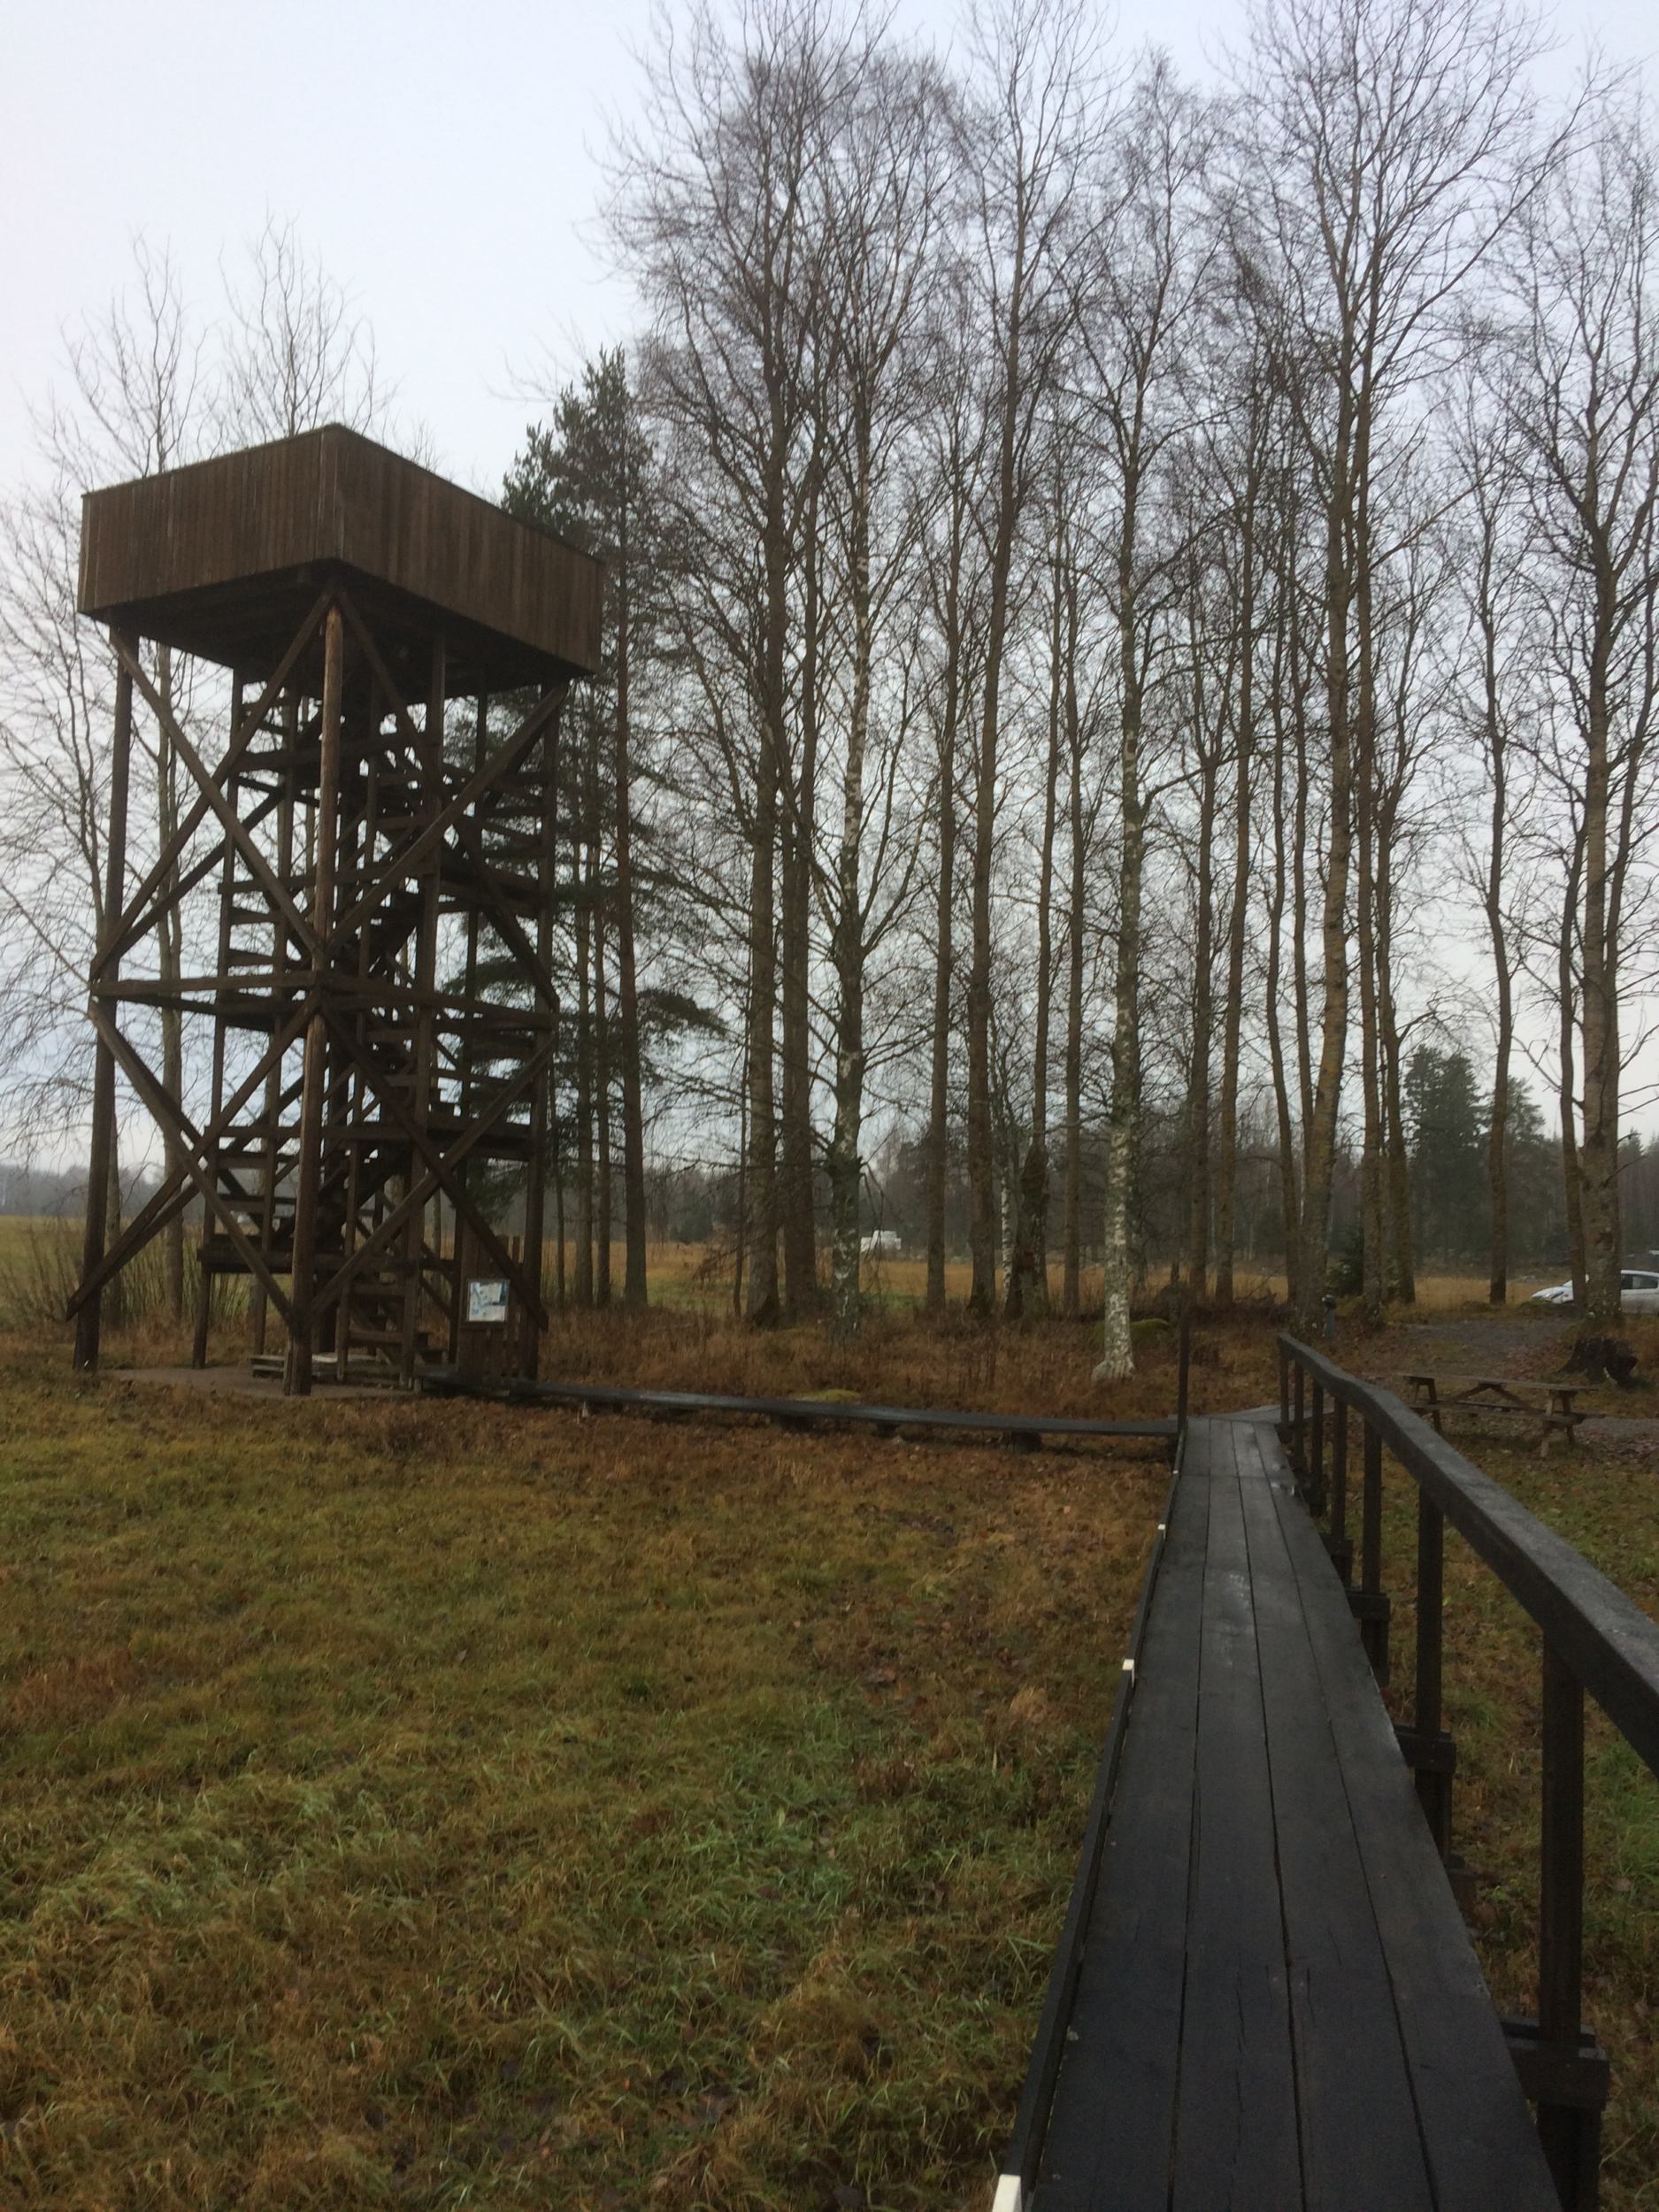 lookout tower occ88sterbo nordmyran